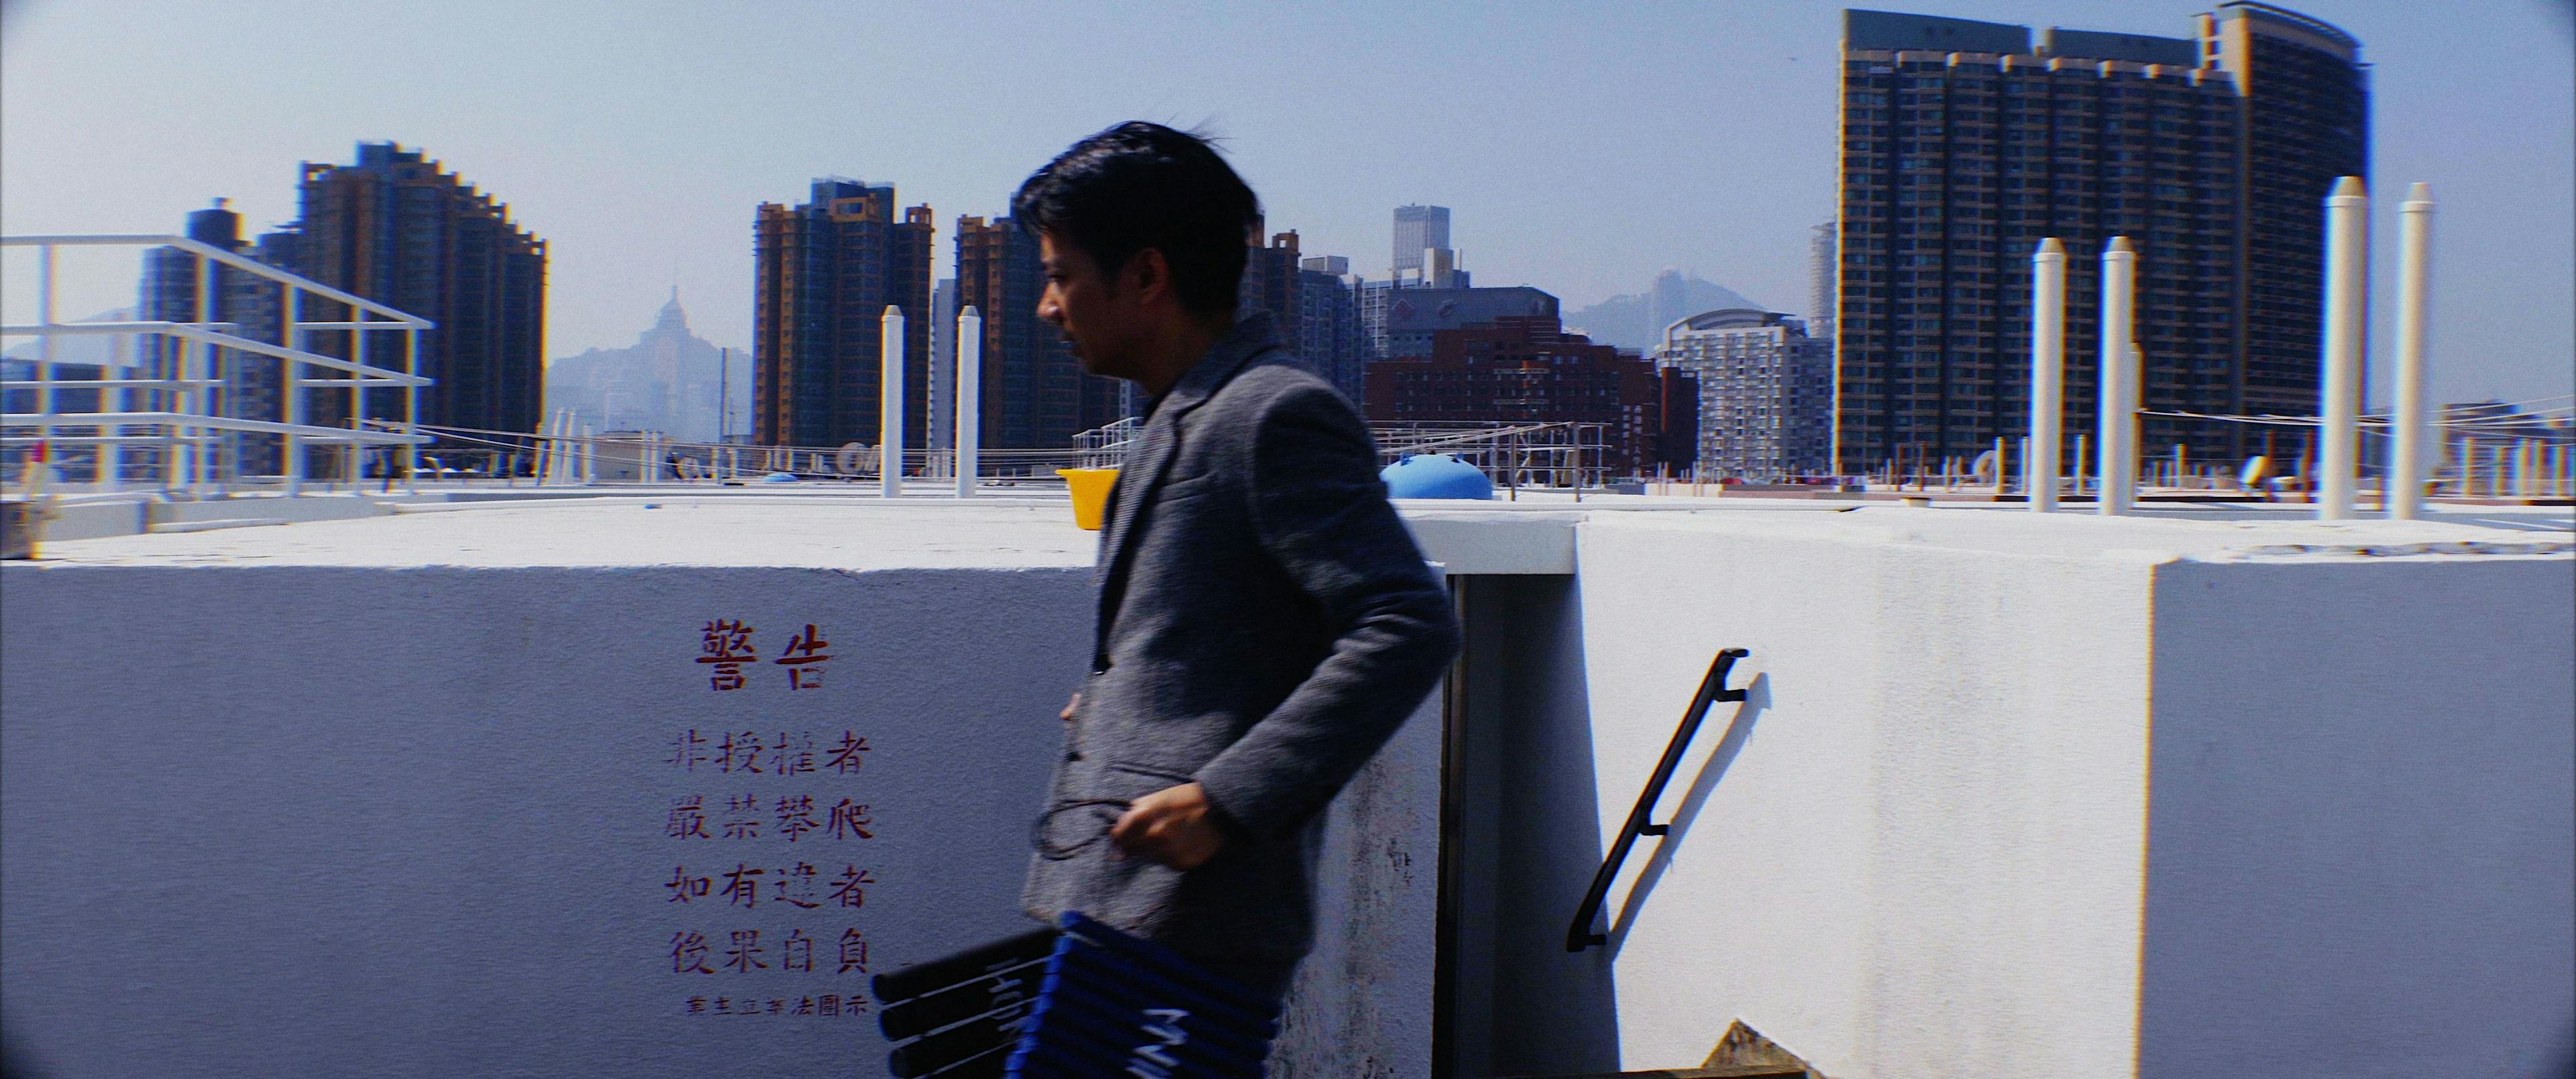 Image of a the side profile of a person wearing a grey blazer. They are on the roof of a building in a city and there are skyscrapers in the background.